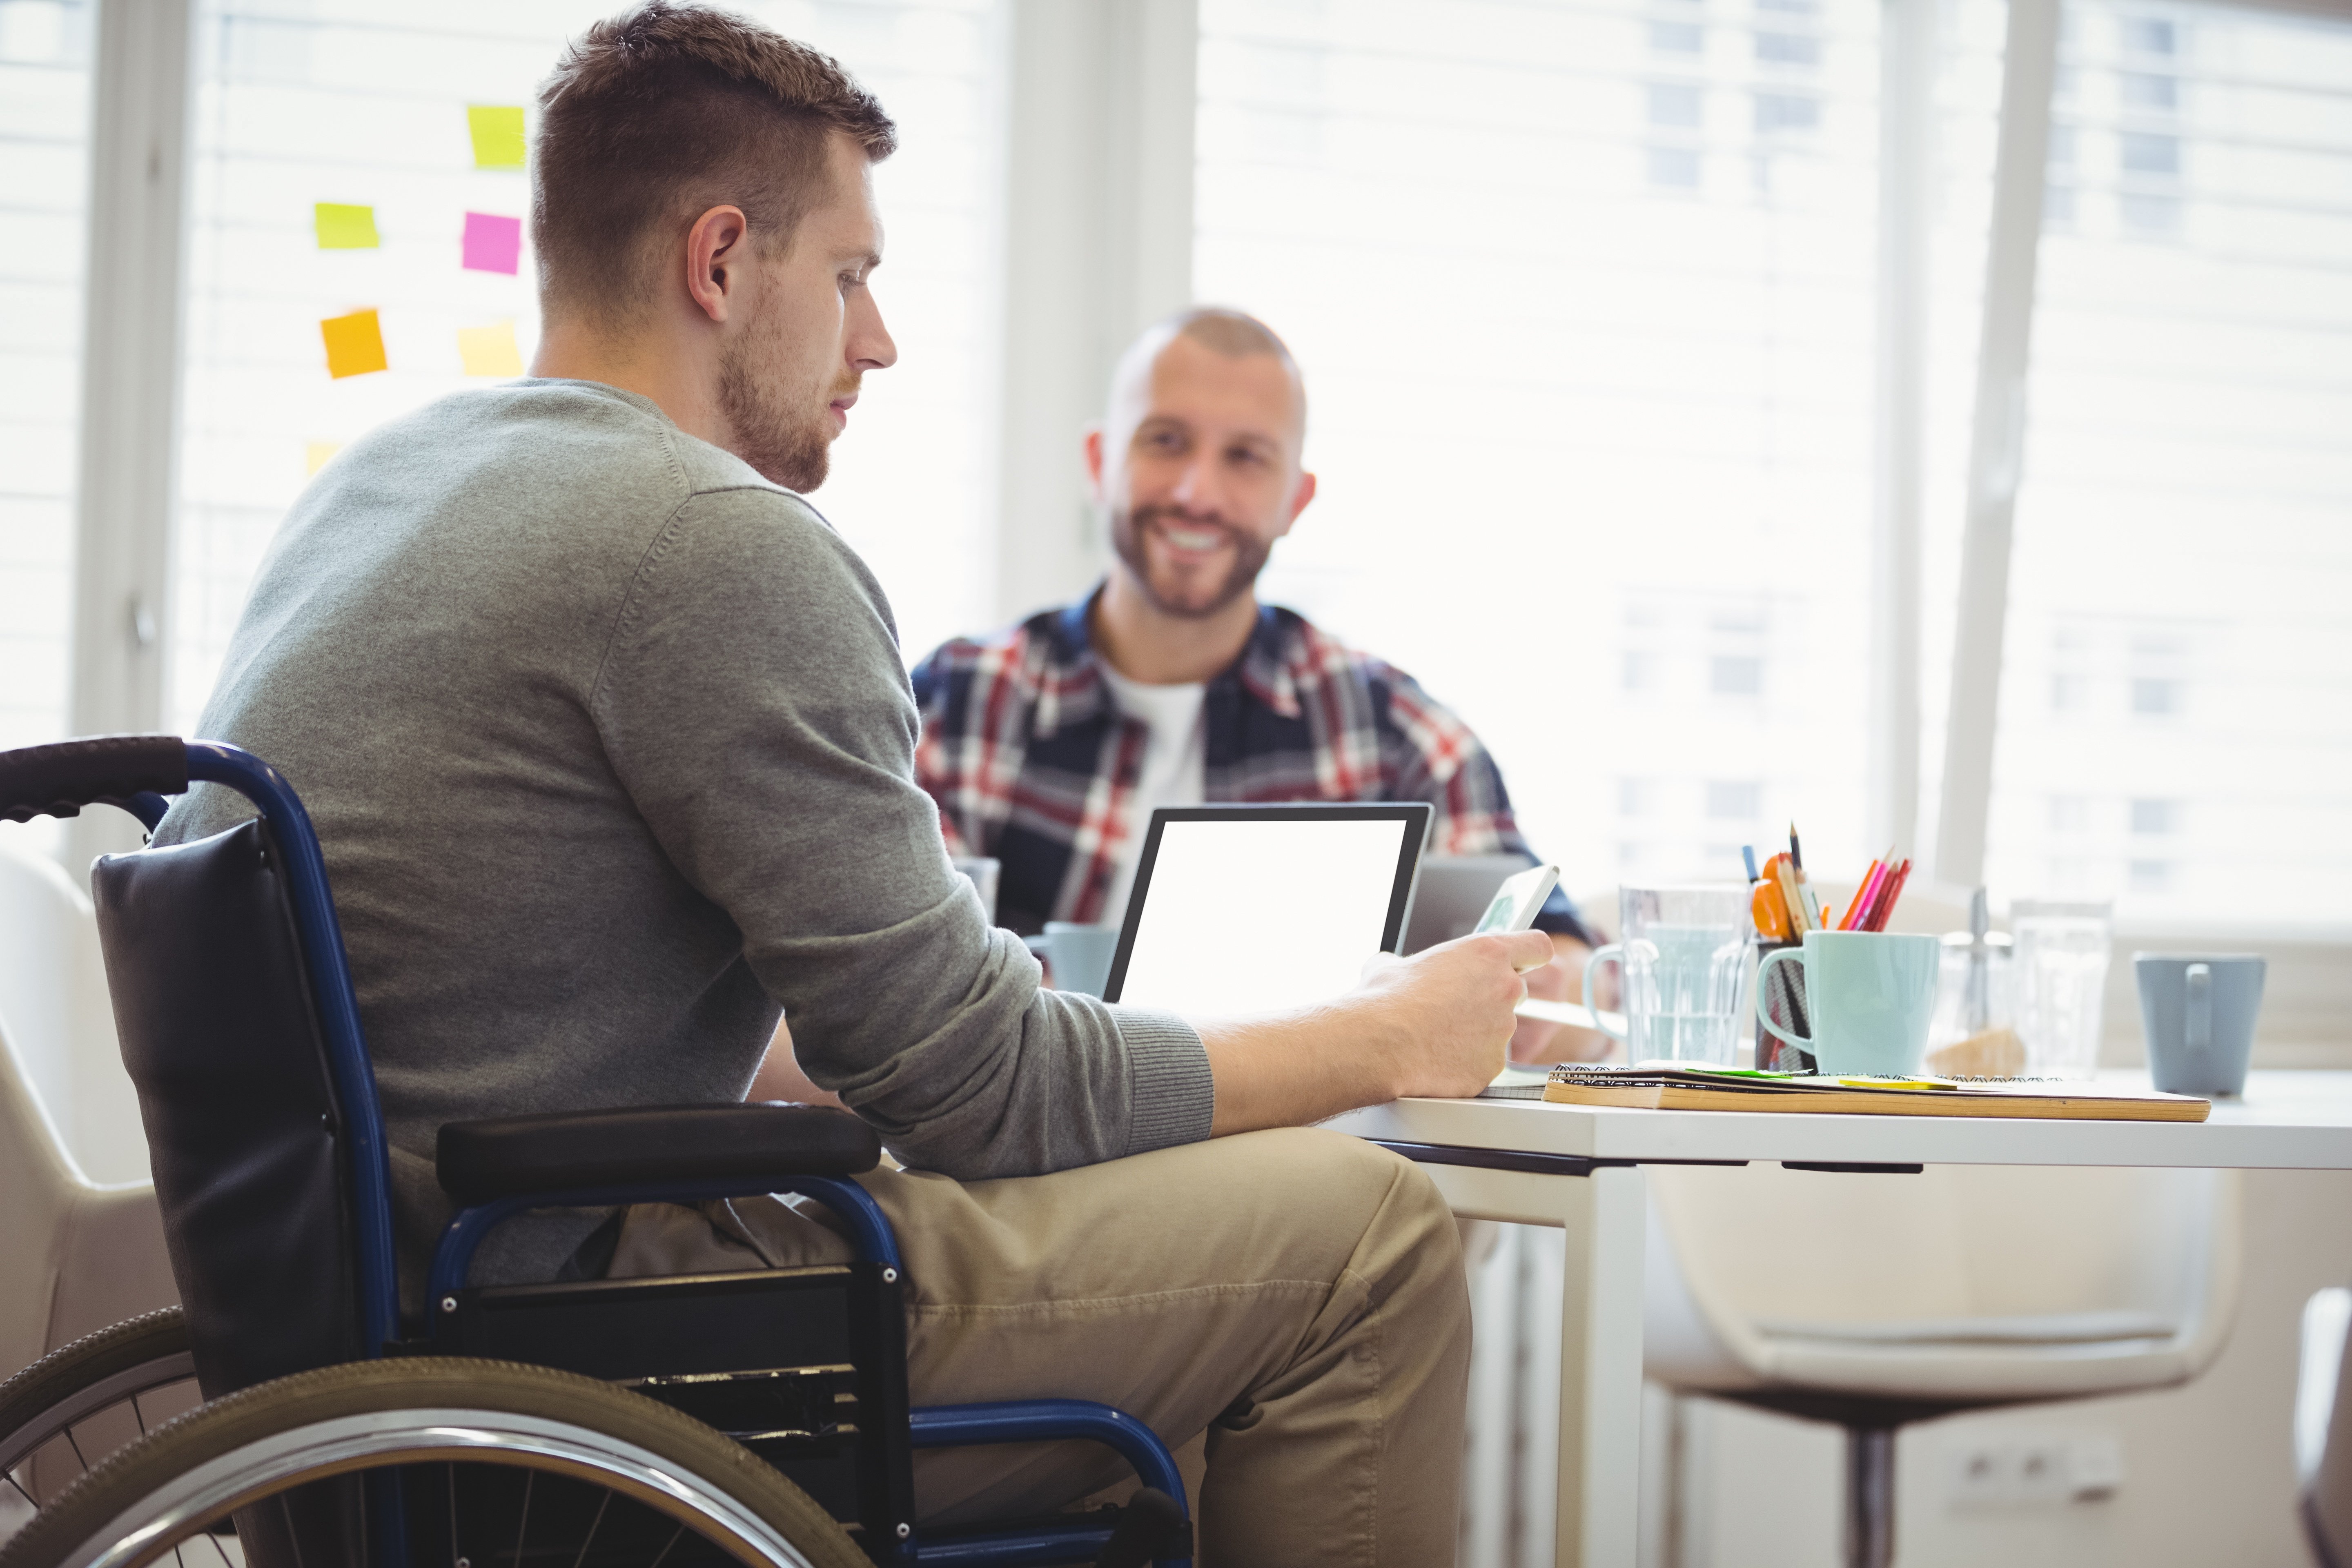 Careers and jobs for people with disabilities